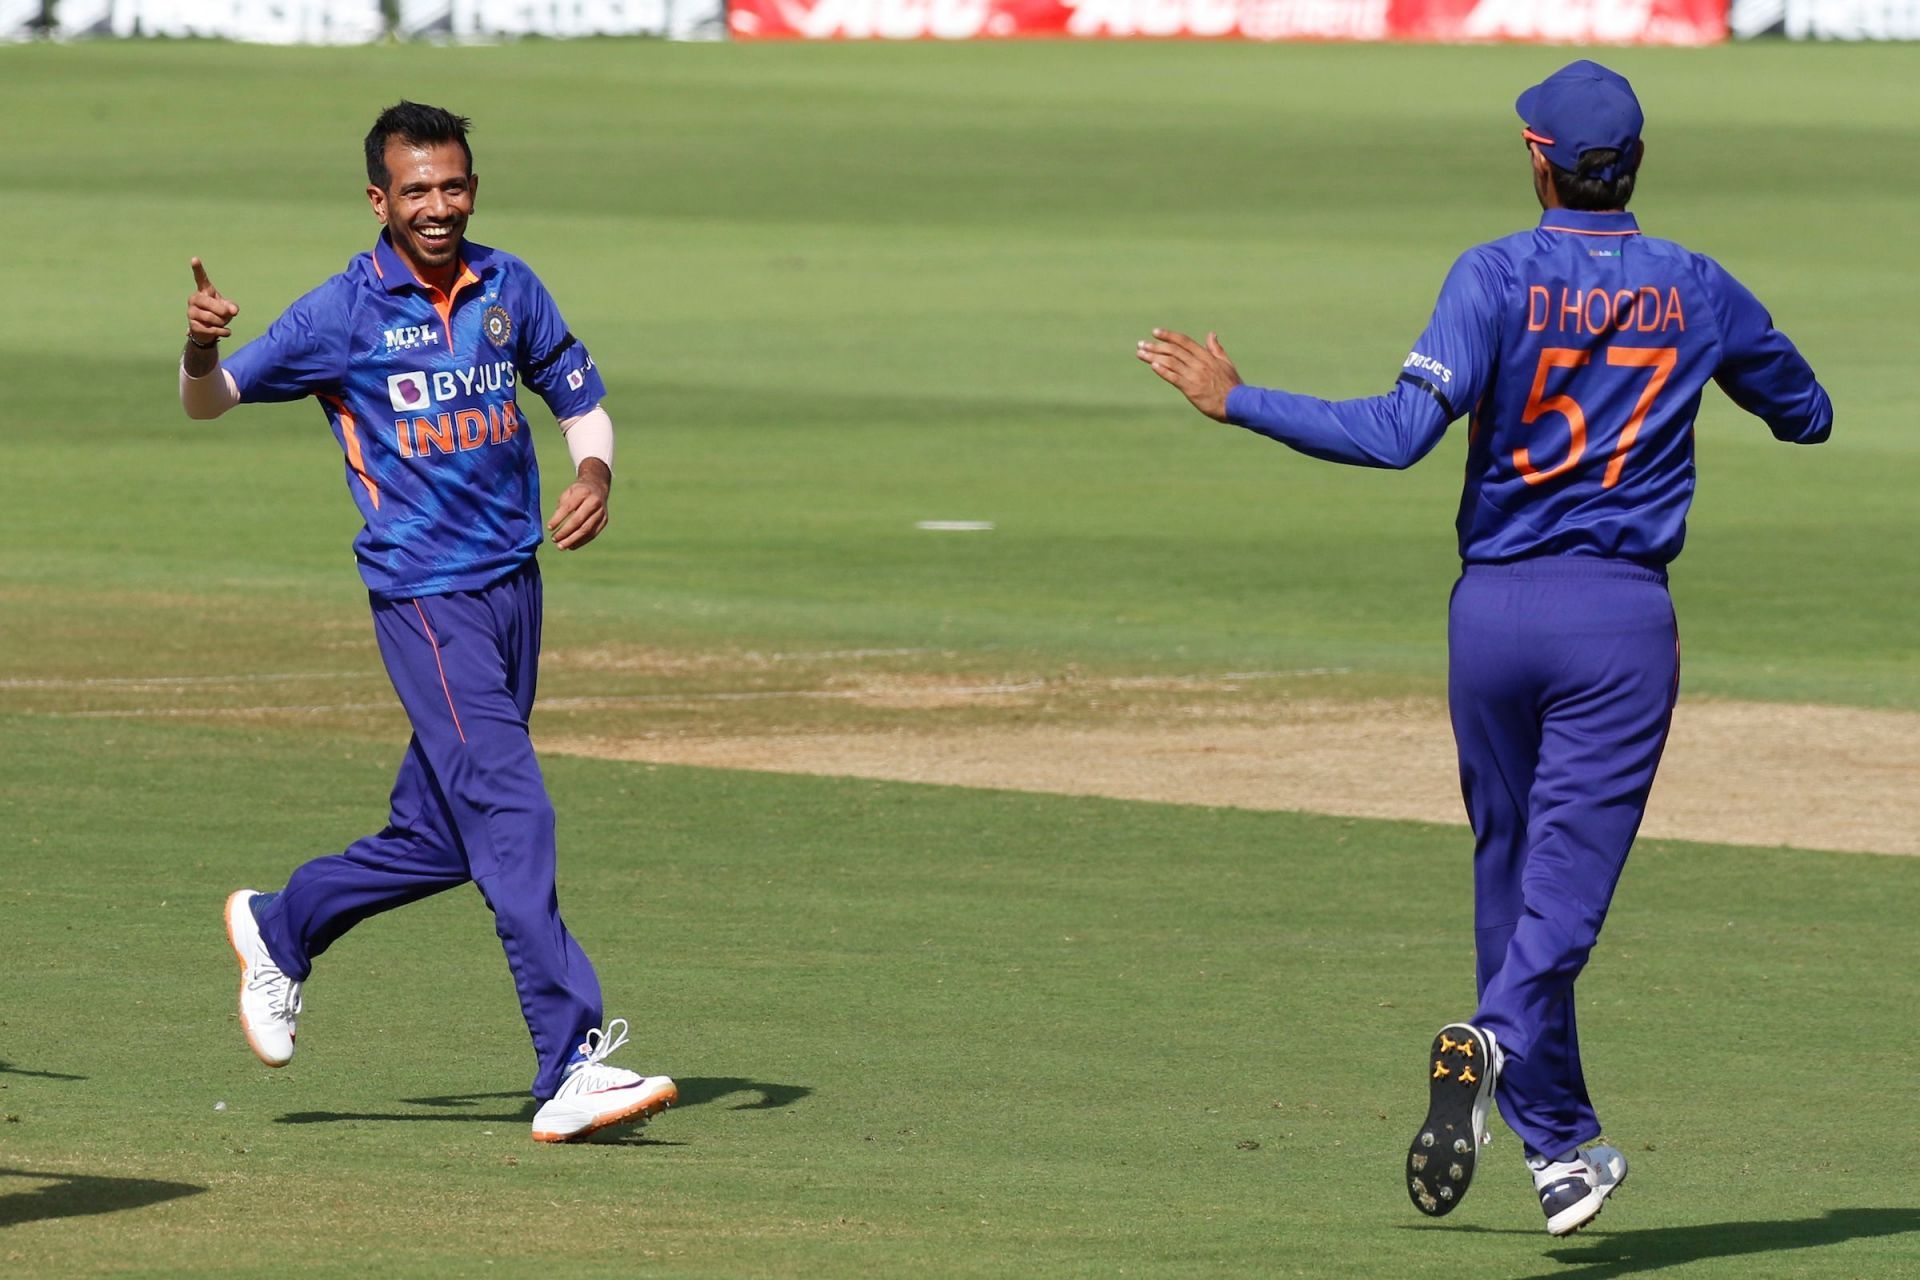 Chahal (L) will be key in the middle overs for India